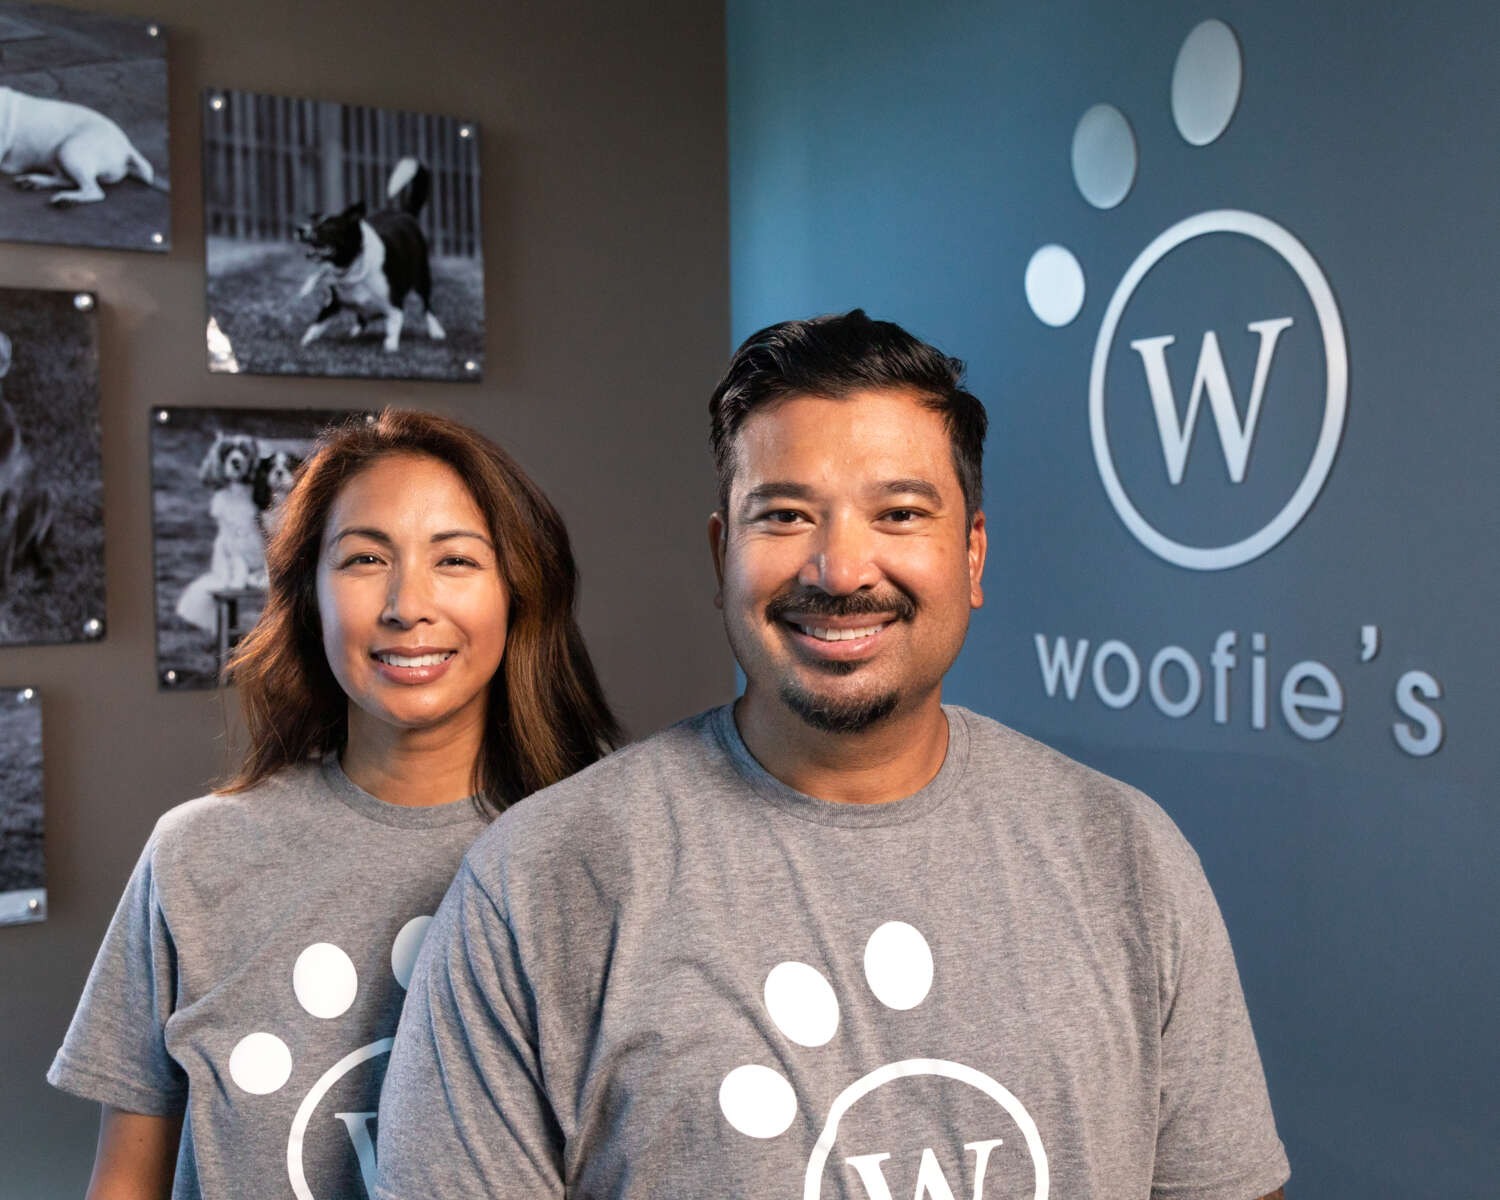 Local resident unleashes pet care service Woofie’s in McLean